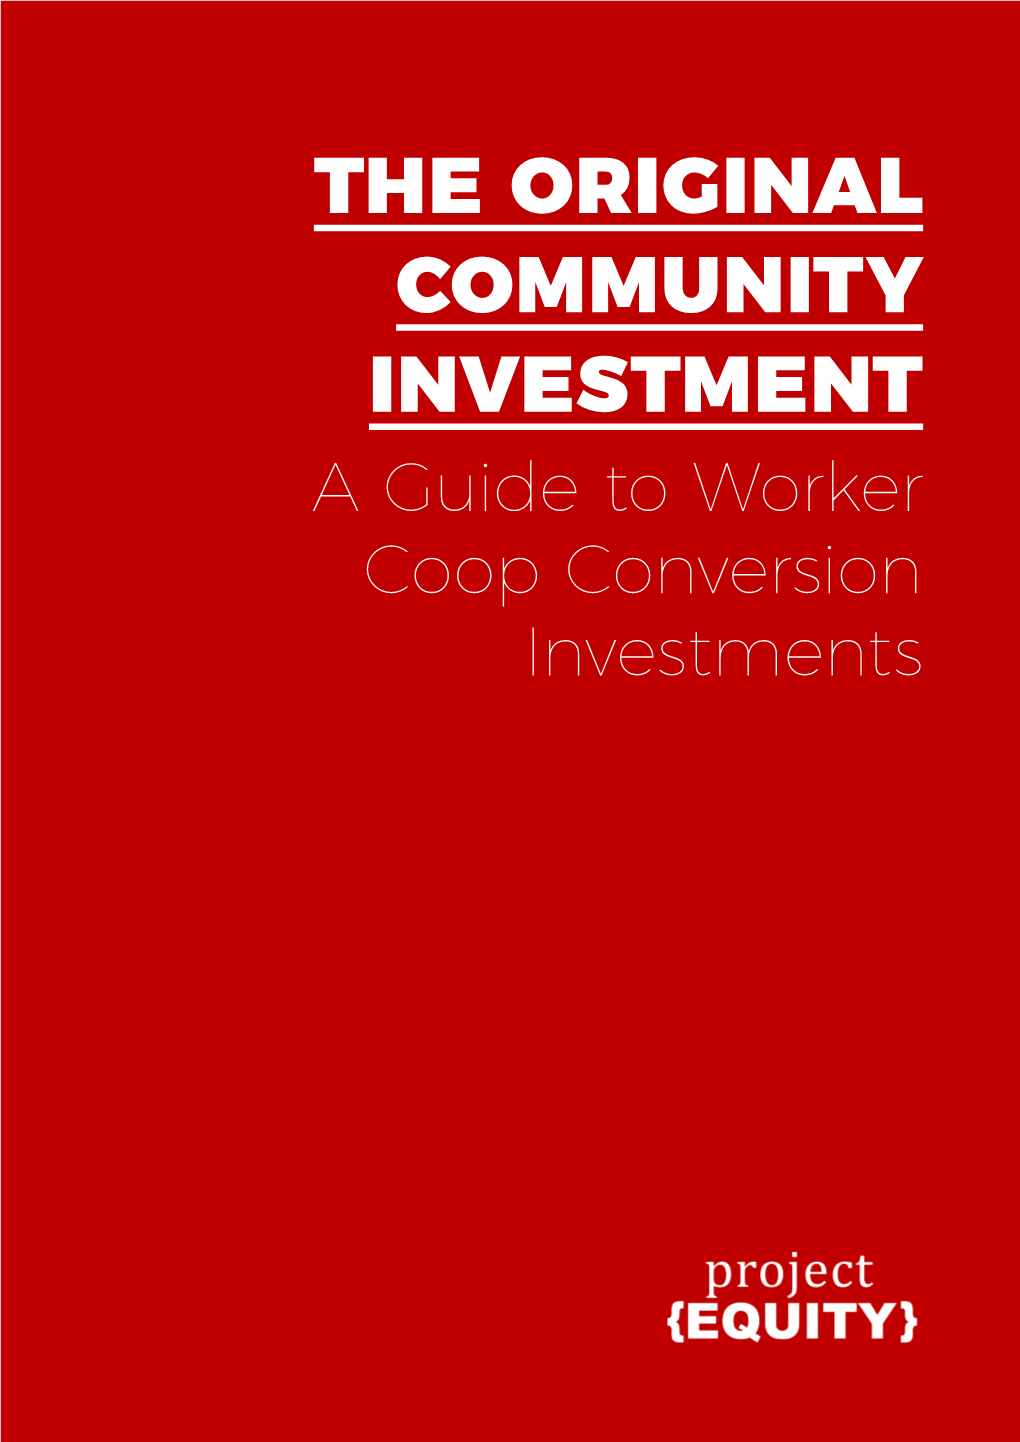 THE ORIGINAL COMMUNITY INVESTMENT a Guide to Worker Coop Conversion Investments ABOUT